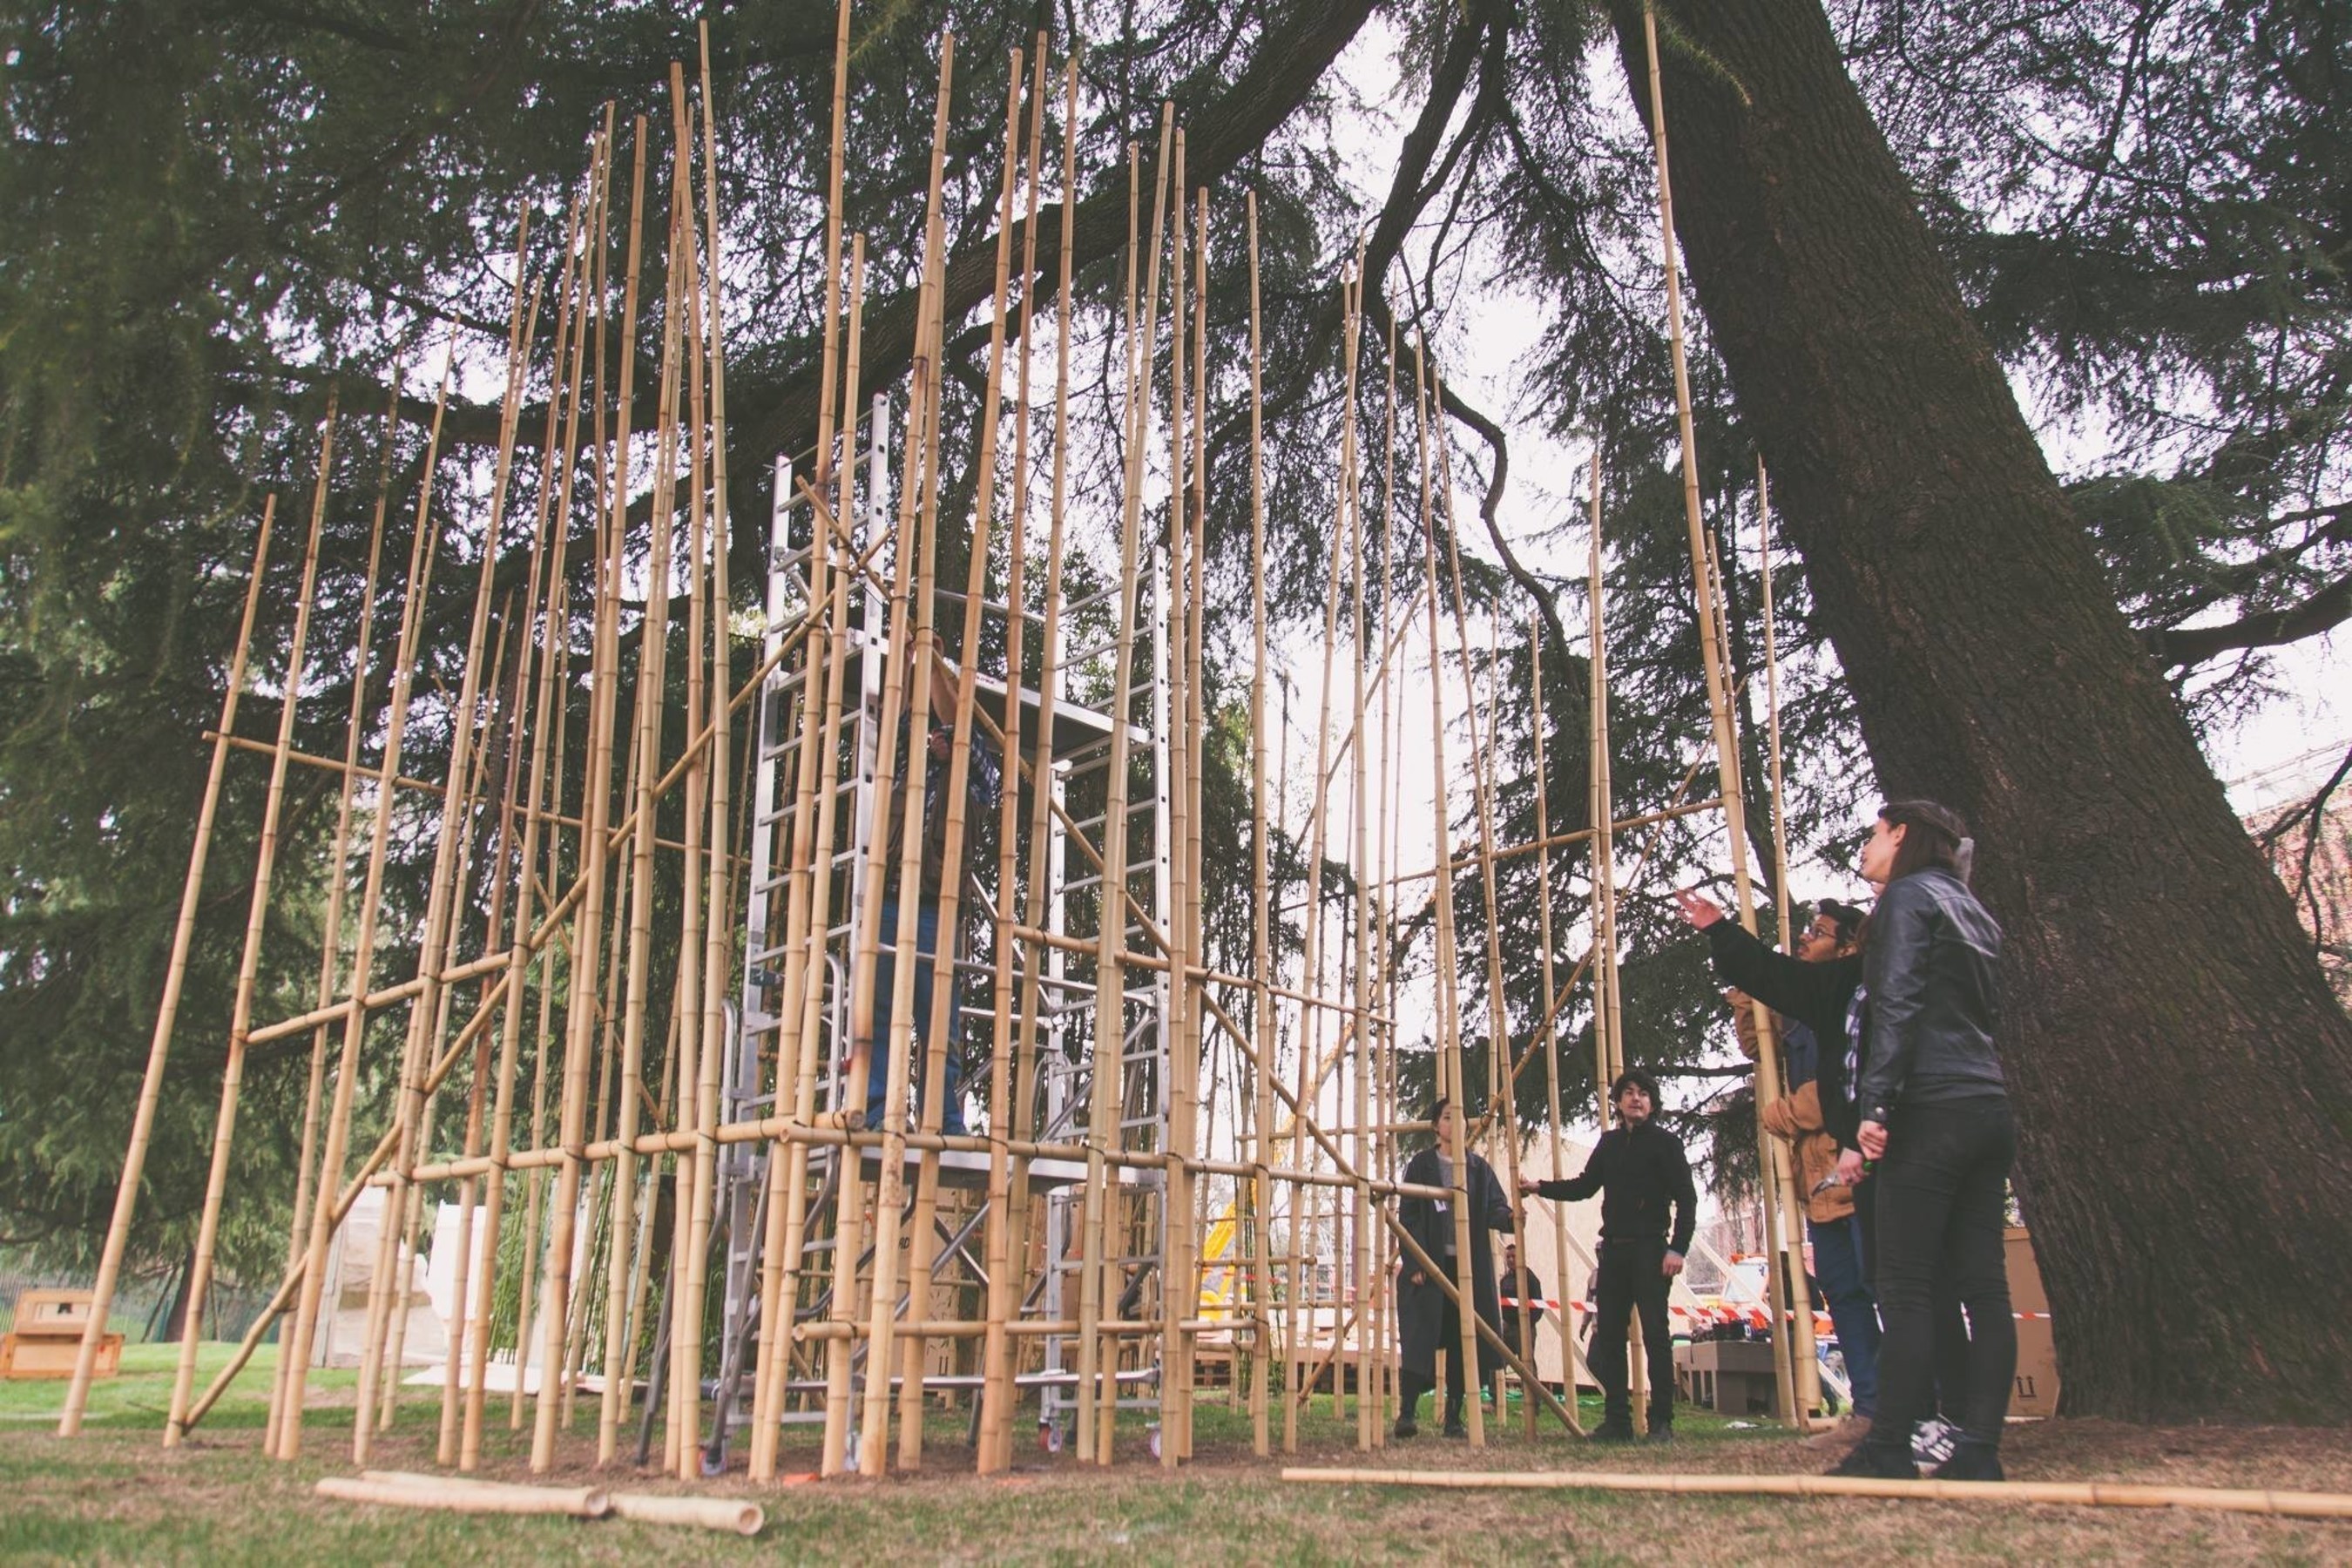 Students from world renowned design institutions Domus Academy and NABA (Milan) and Tsinghua University (Beijing) team up to build and unveiling their joint exhibition, Noosphere XX1: A Model for the Production of Knowledge, at the XXI Triennale International Exhibition 2016 in Milan. Open to the public beginning on April 2, the Pavilion in the Triennale Garden explores new scenarios between Past, Present and Future, inspiring new educational forms in the world of design.